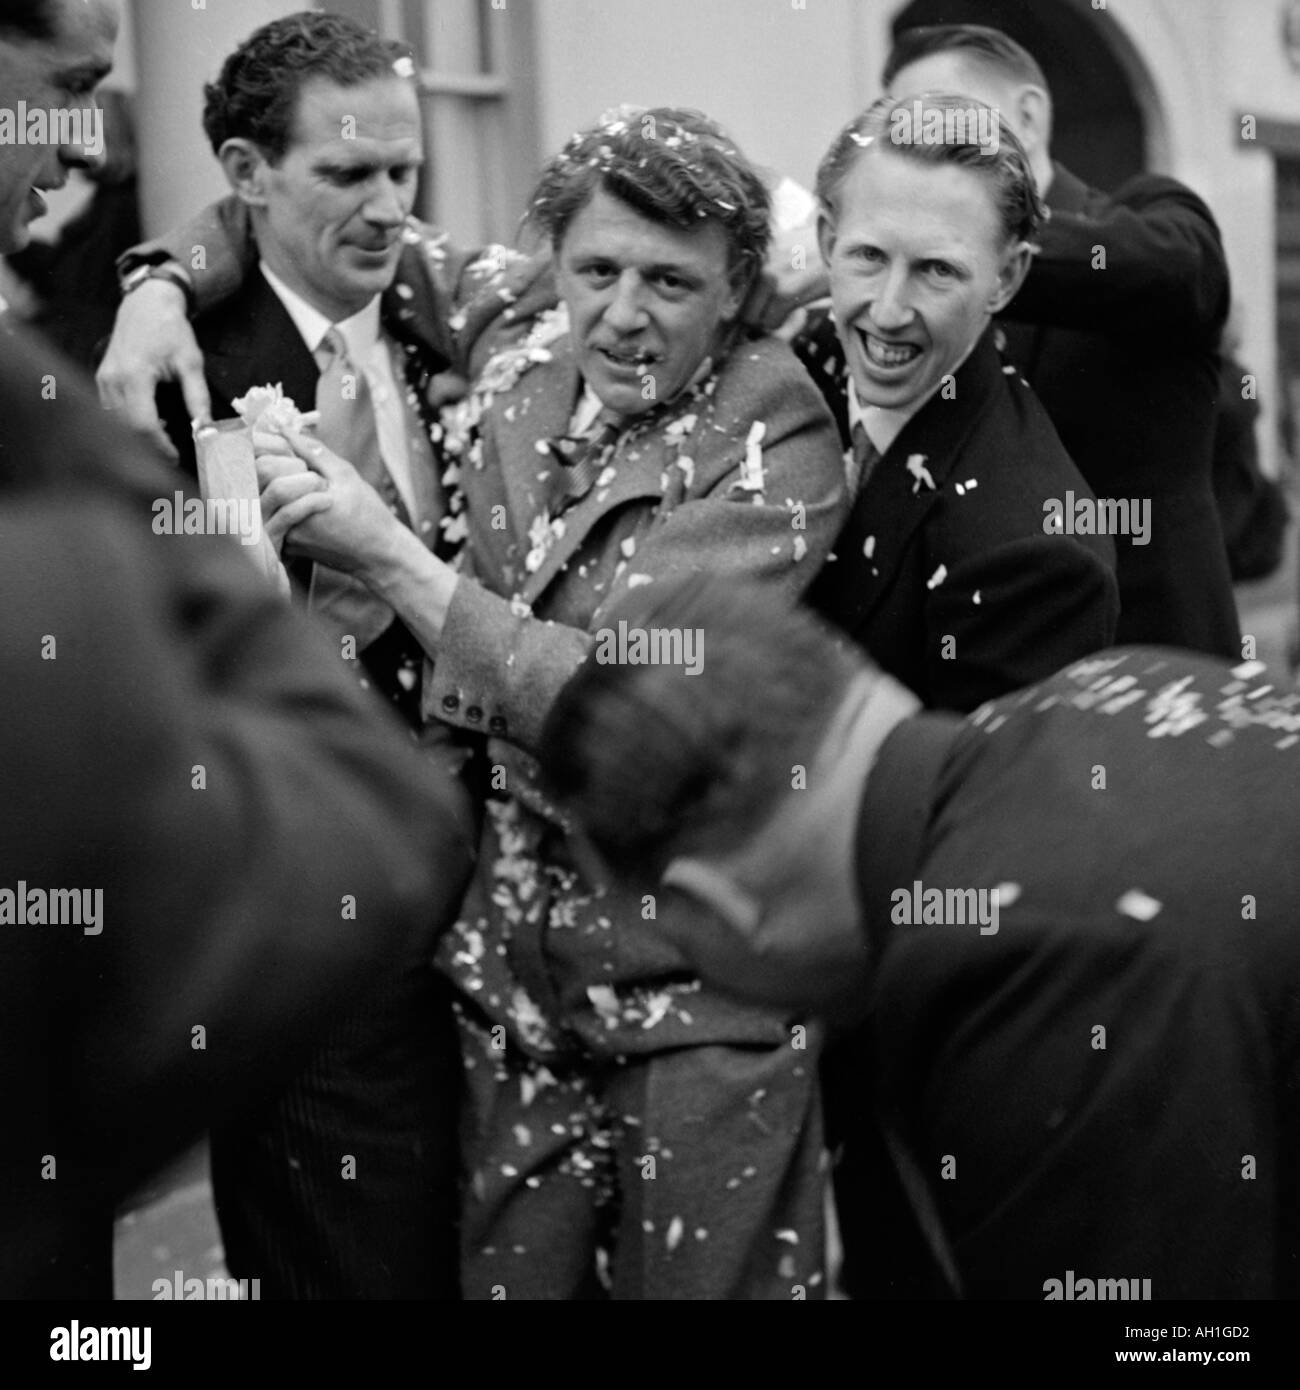 OLD VINTAGE FAMILY PHOTOGRAPH SNAP SHOT OF GUESTS THROWING CONFETTI AT BRIDEGROOM AFTER WEDDING CEREMONY CIRCA 1950 Stock Photo